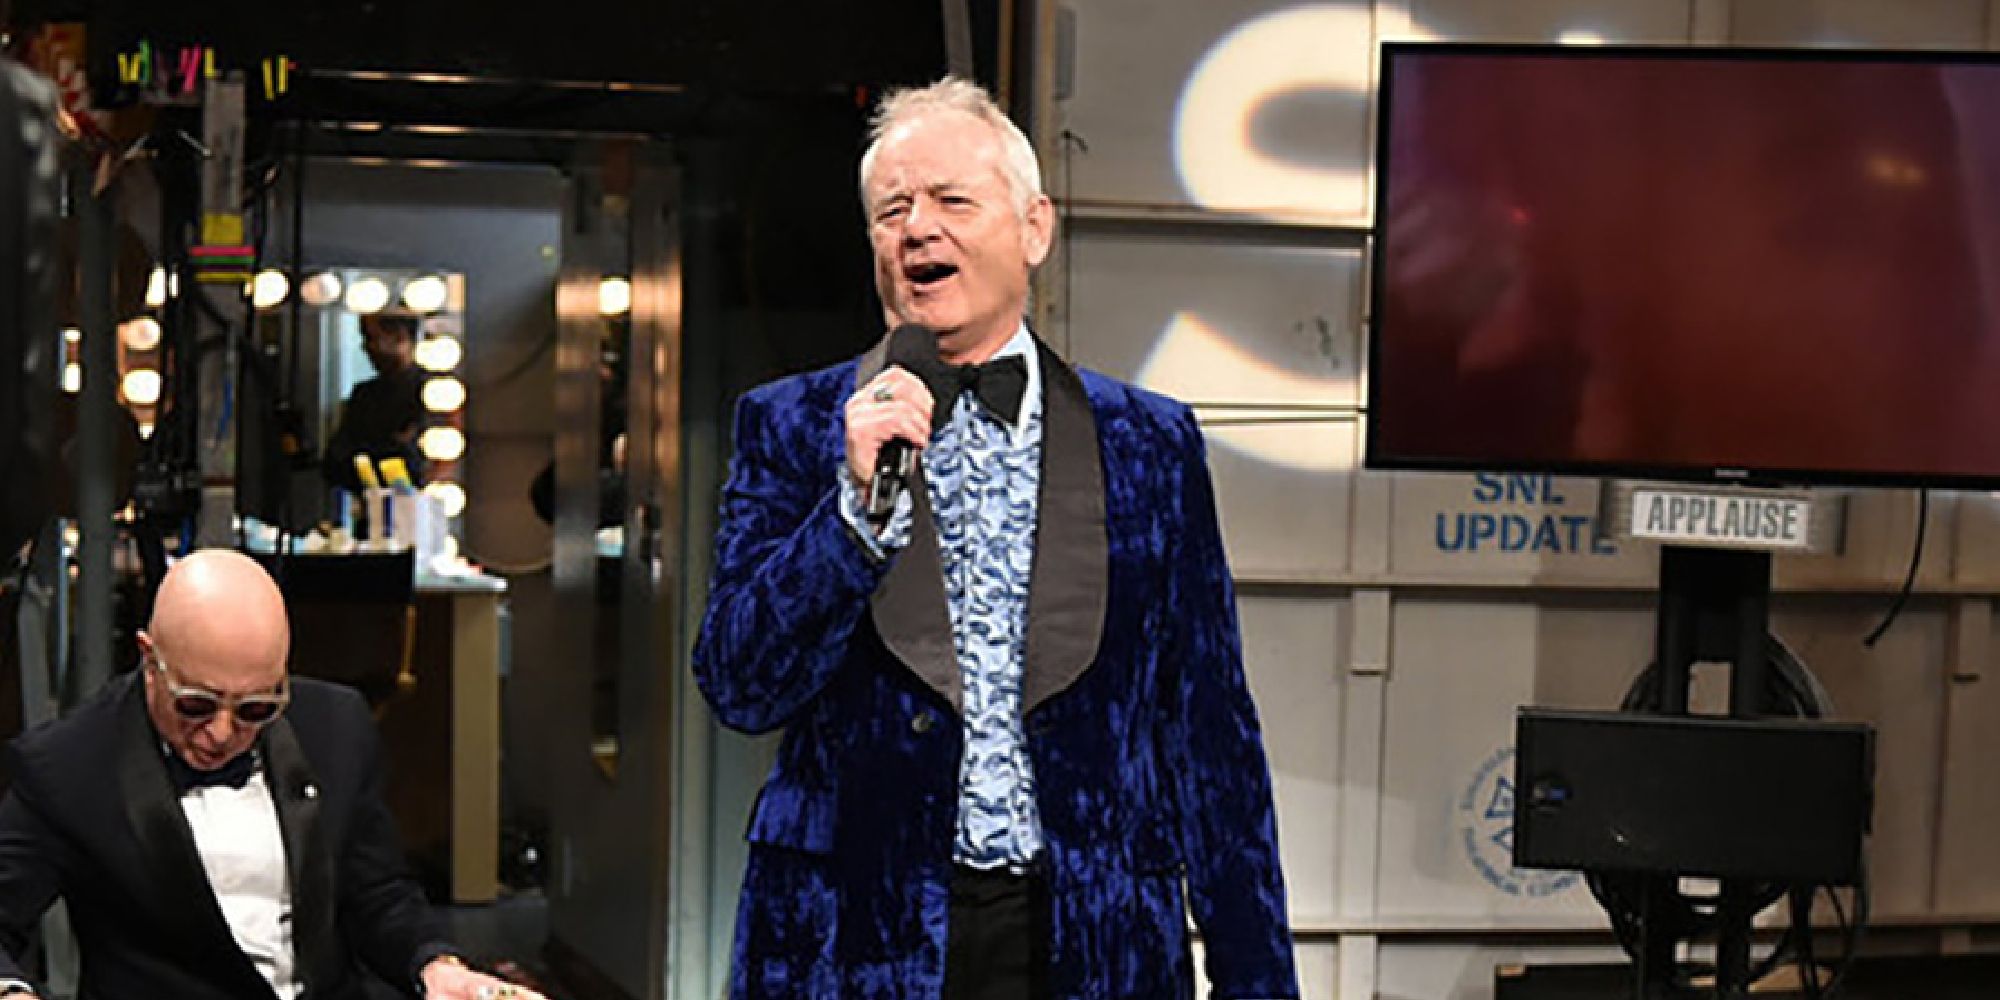 Bill Murray as Nick the Lounge Singer at SNL's 40th anniversary show, accompanied by Paul Schaffer